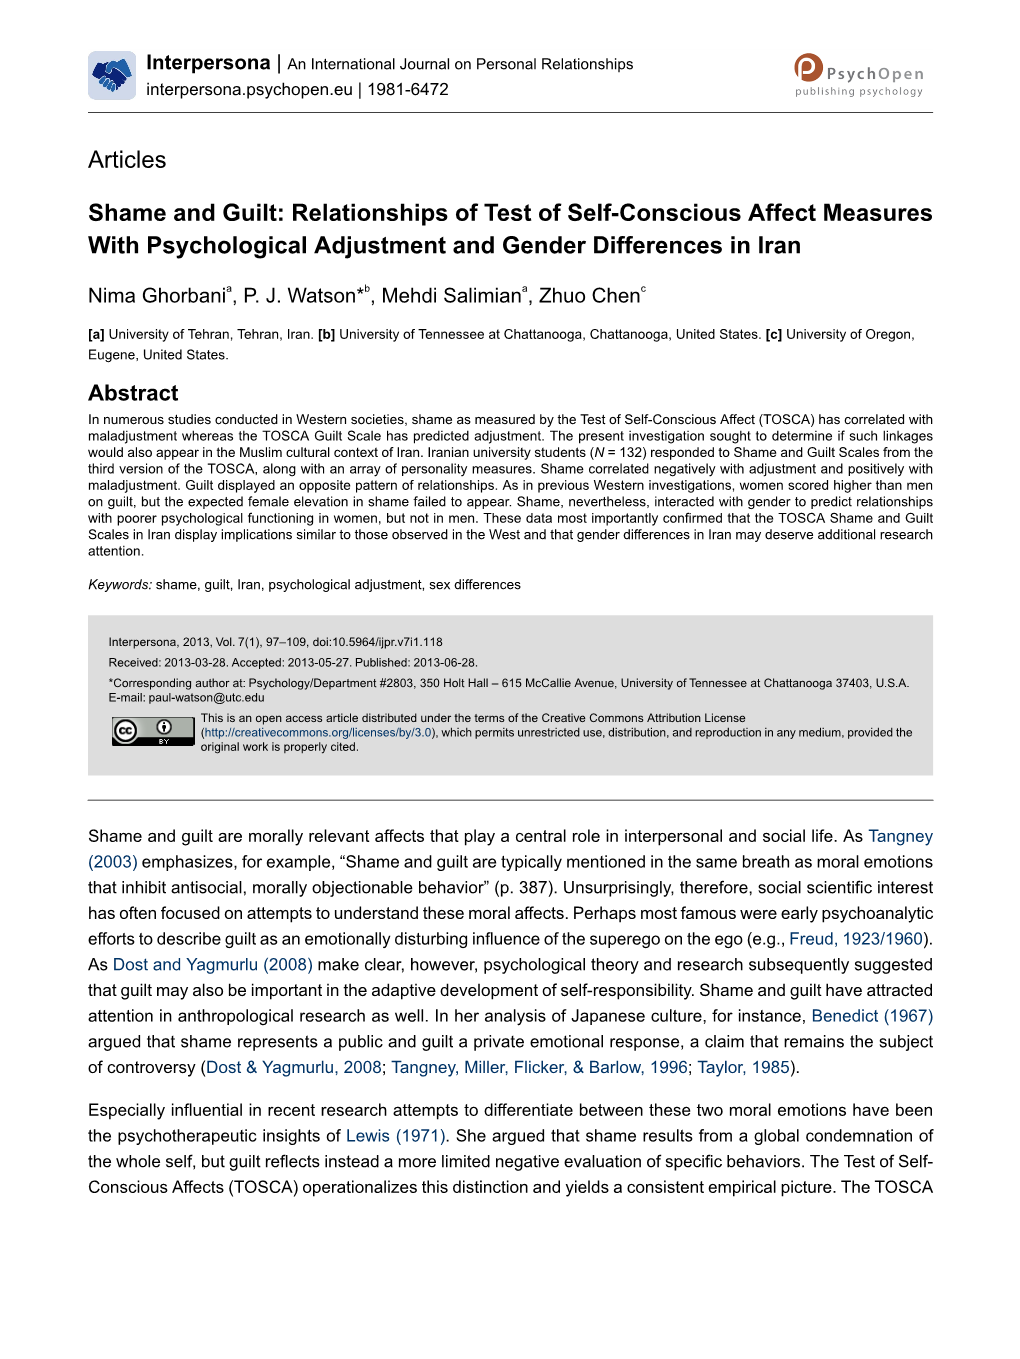 Shame and Guilt: Relationships of Test of Self-Conscious Affect Measures with Psychological Adjustment and Gender Differences in Iran